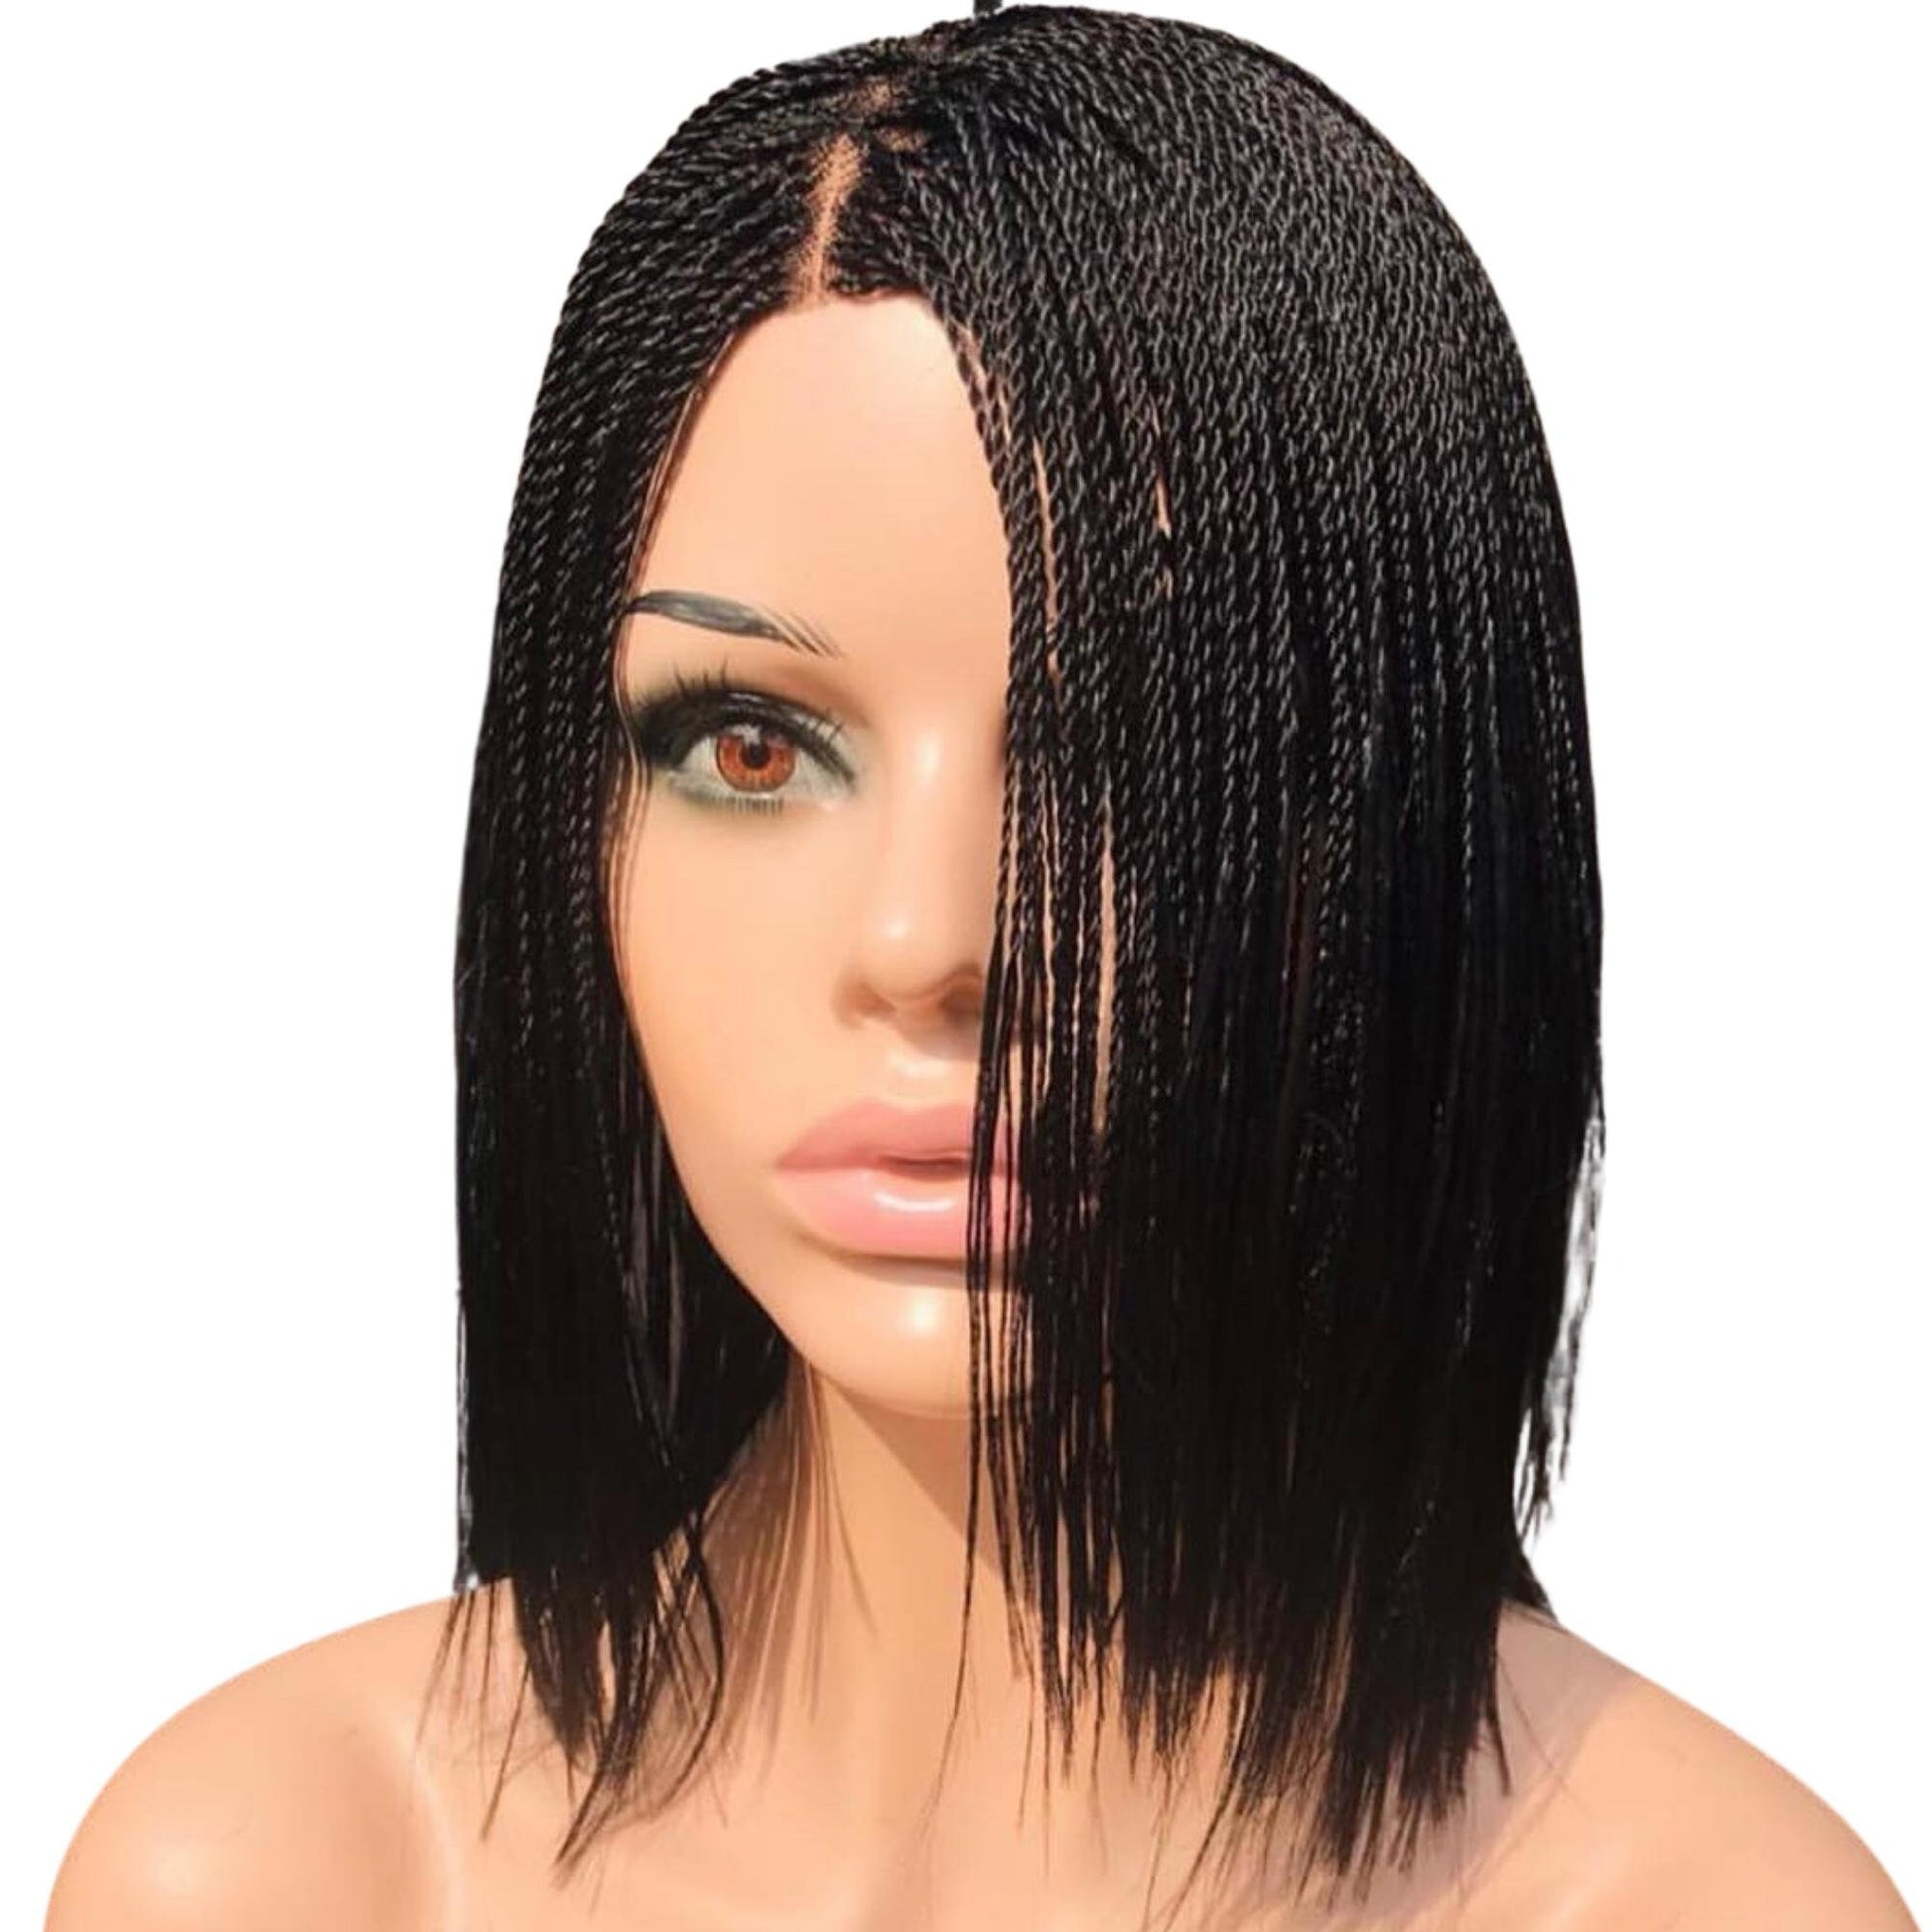 2 in 1 set of braided wigs, cornrow braid wig, micro braid wig, Synthetic black lace front wigs, box braids, braided wigs for black women - BRAIDED WIG BOSS